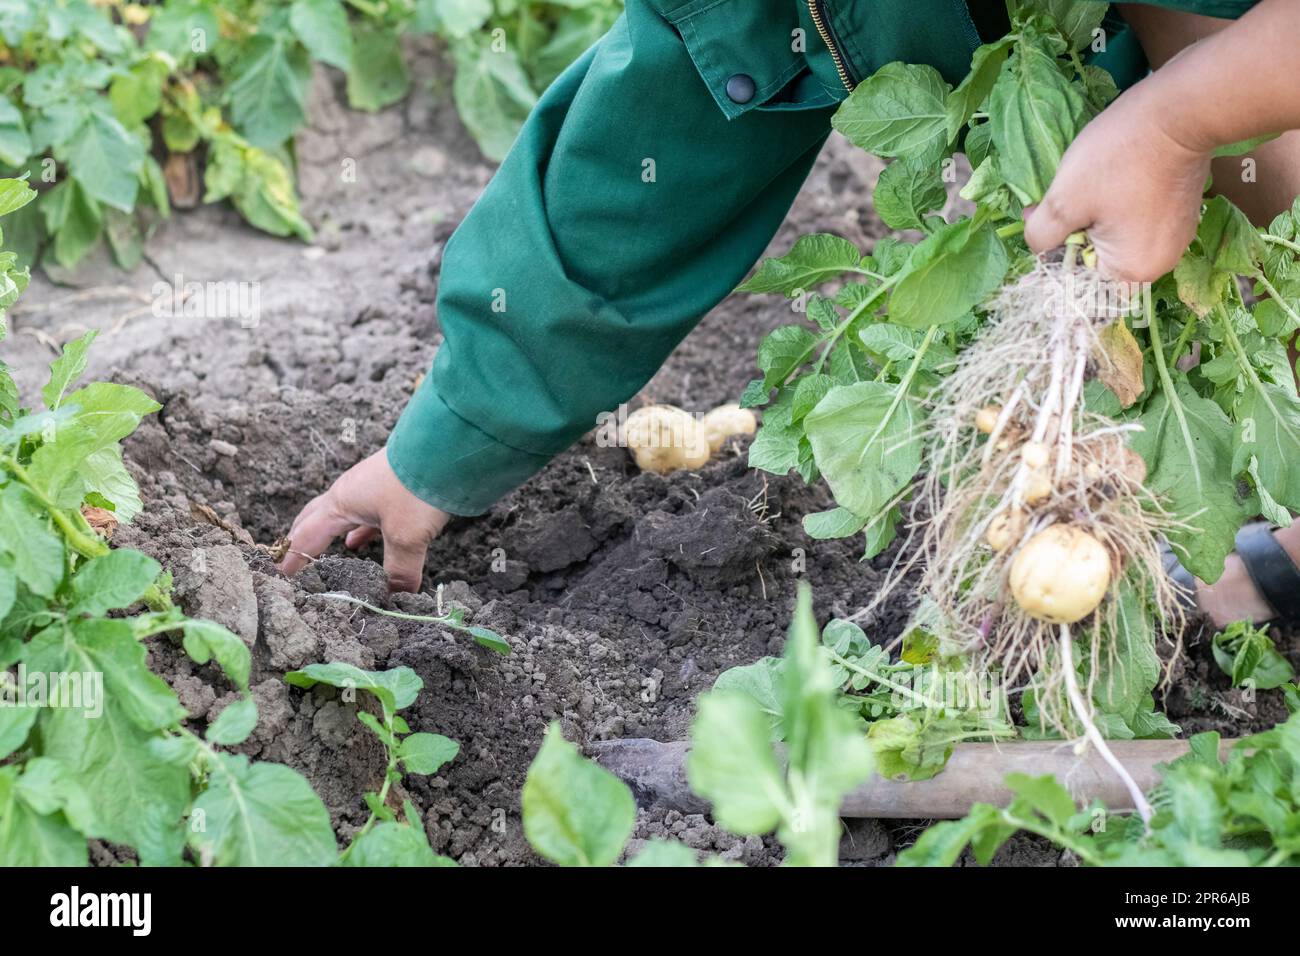 Harvesting potatoes from the soil. Newly dug or harvested potatoes on rich brown ground. Fresh organic potatoes on the ground in a field on a summer day. The concept of growing food. New potatoes. Stock Photo